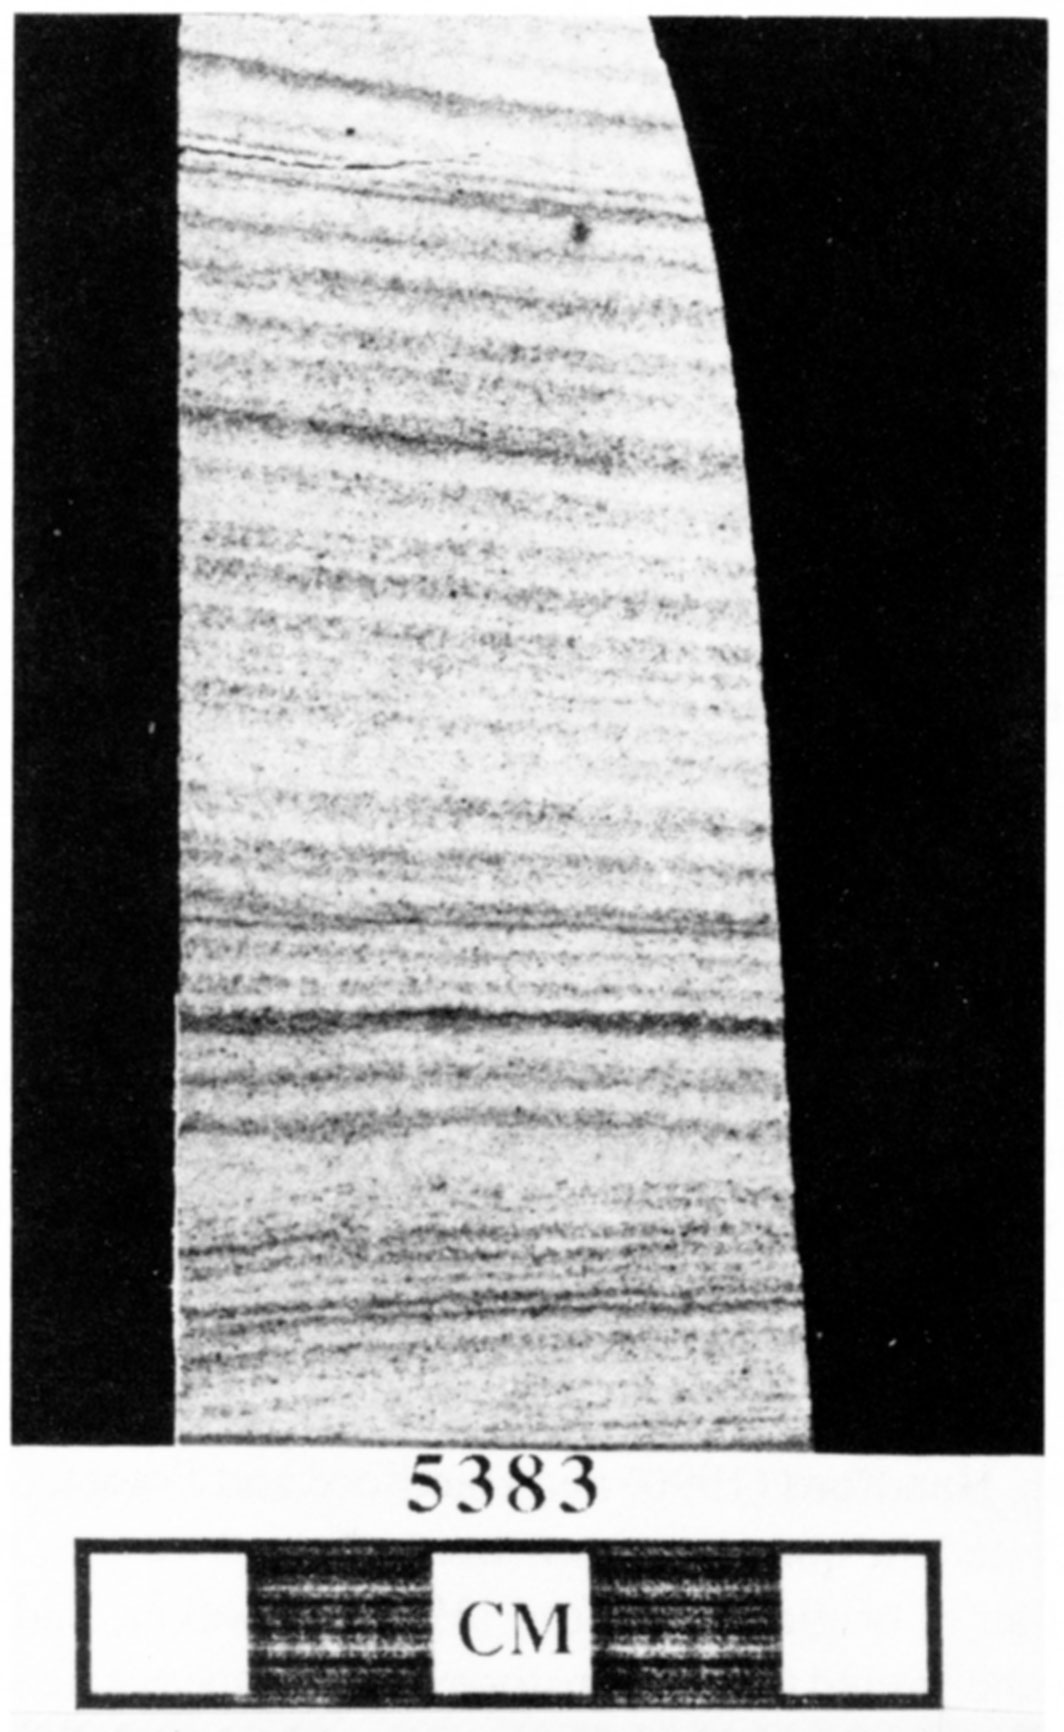 Climbing translatent strata, typically 2-5 mm thick, formed by the migration of climbing wind ripples from the Ste. Genevieve quartzose grainstone facies.